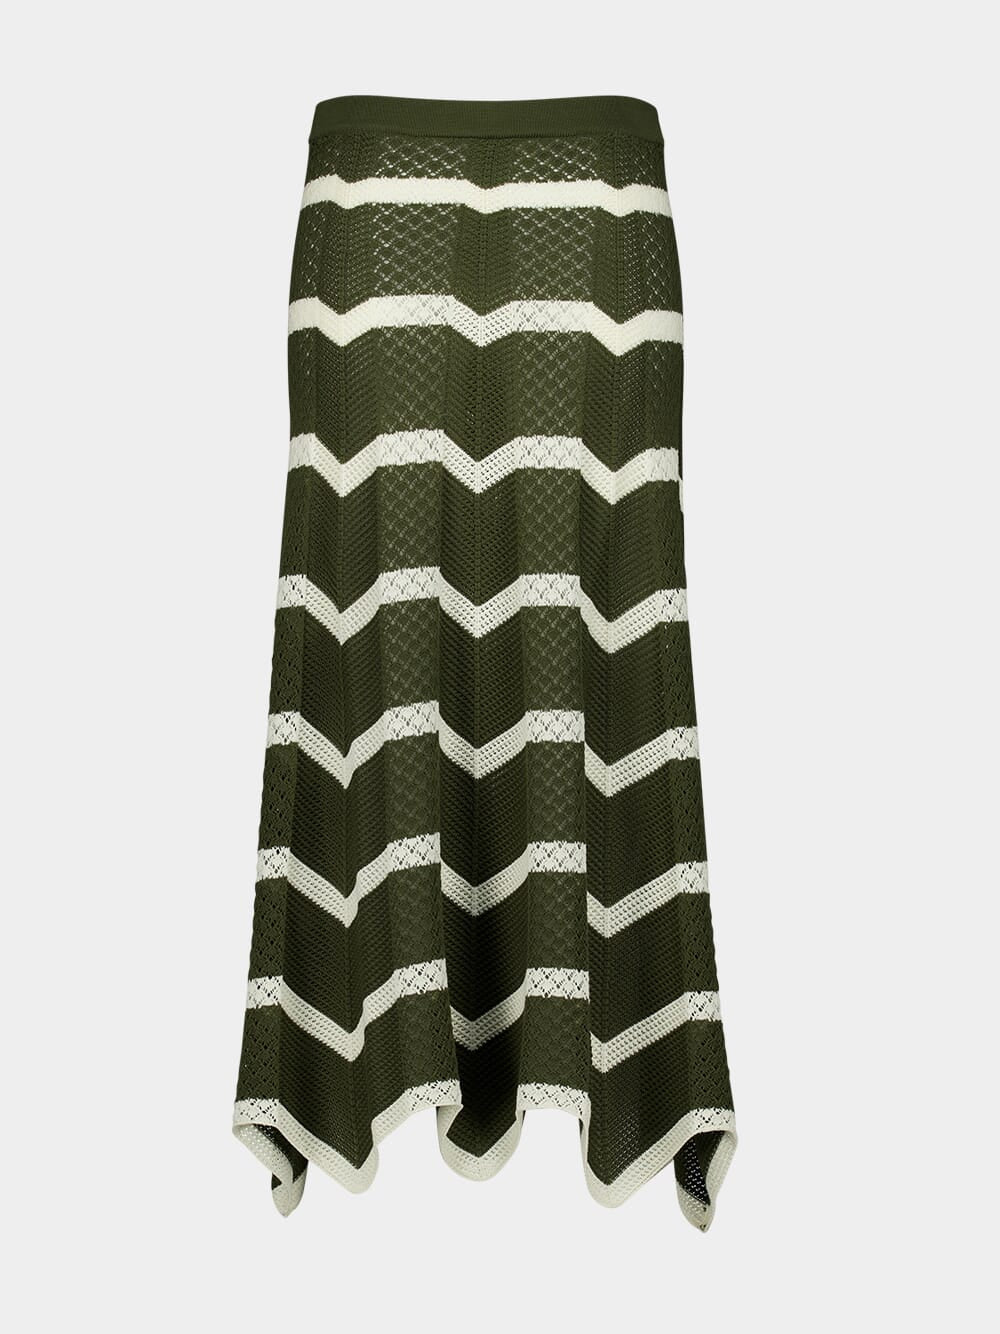 Solid Camouflage Chevron Skirt